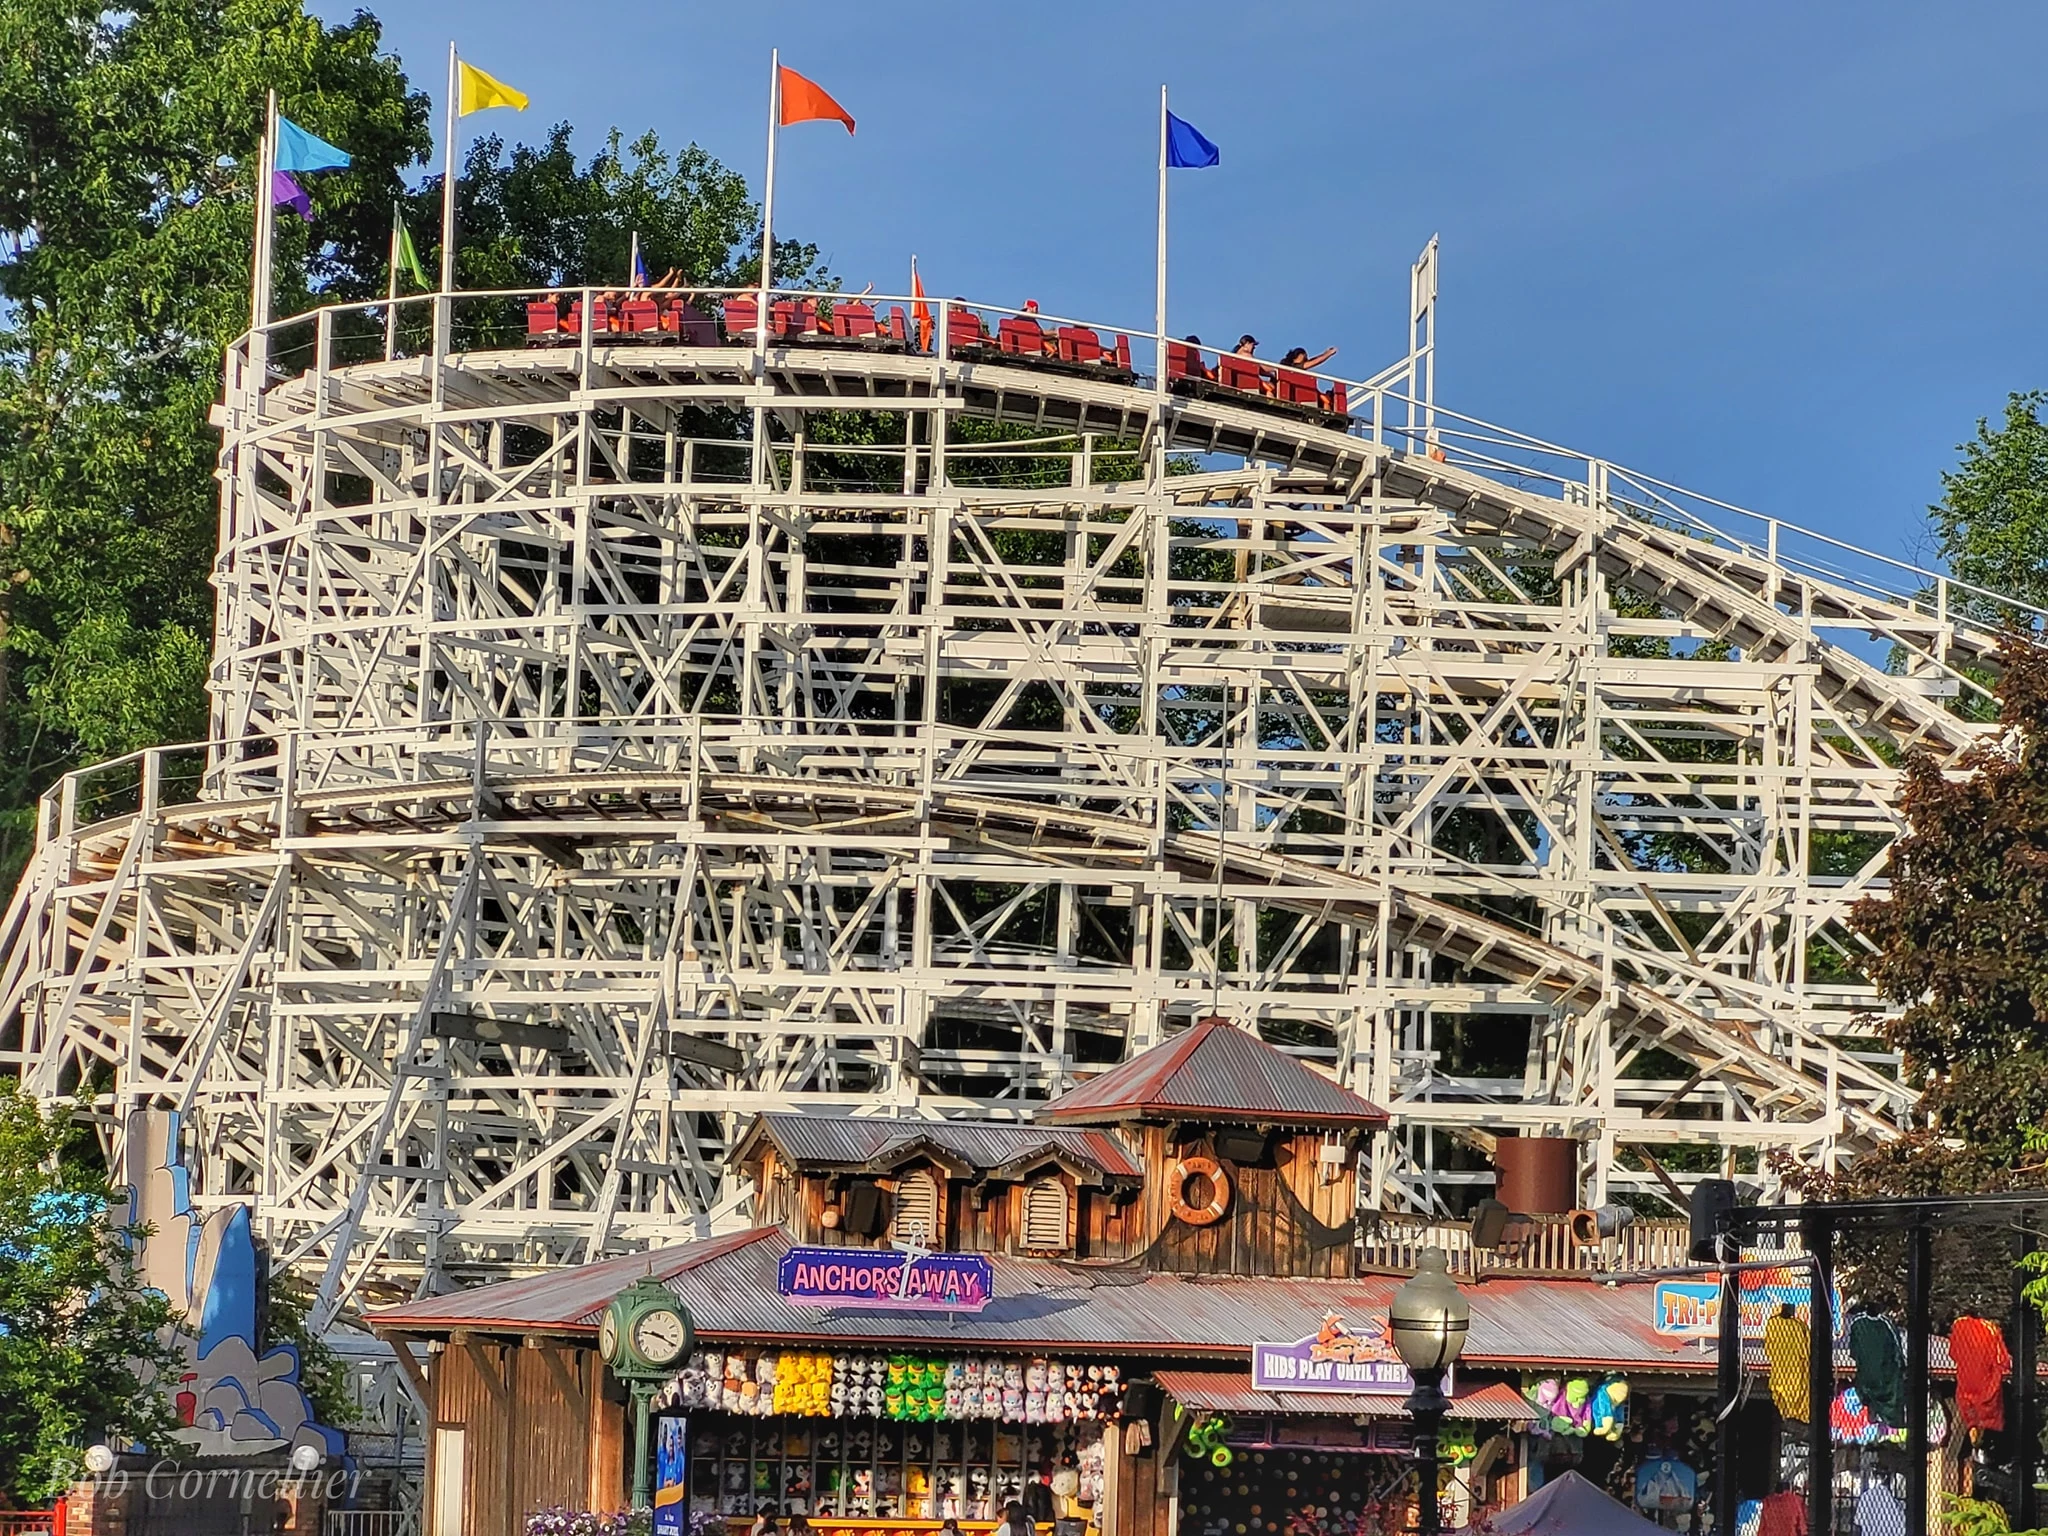 This Mass. Roller Coaster Is One Of The Three Oldest In NE